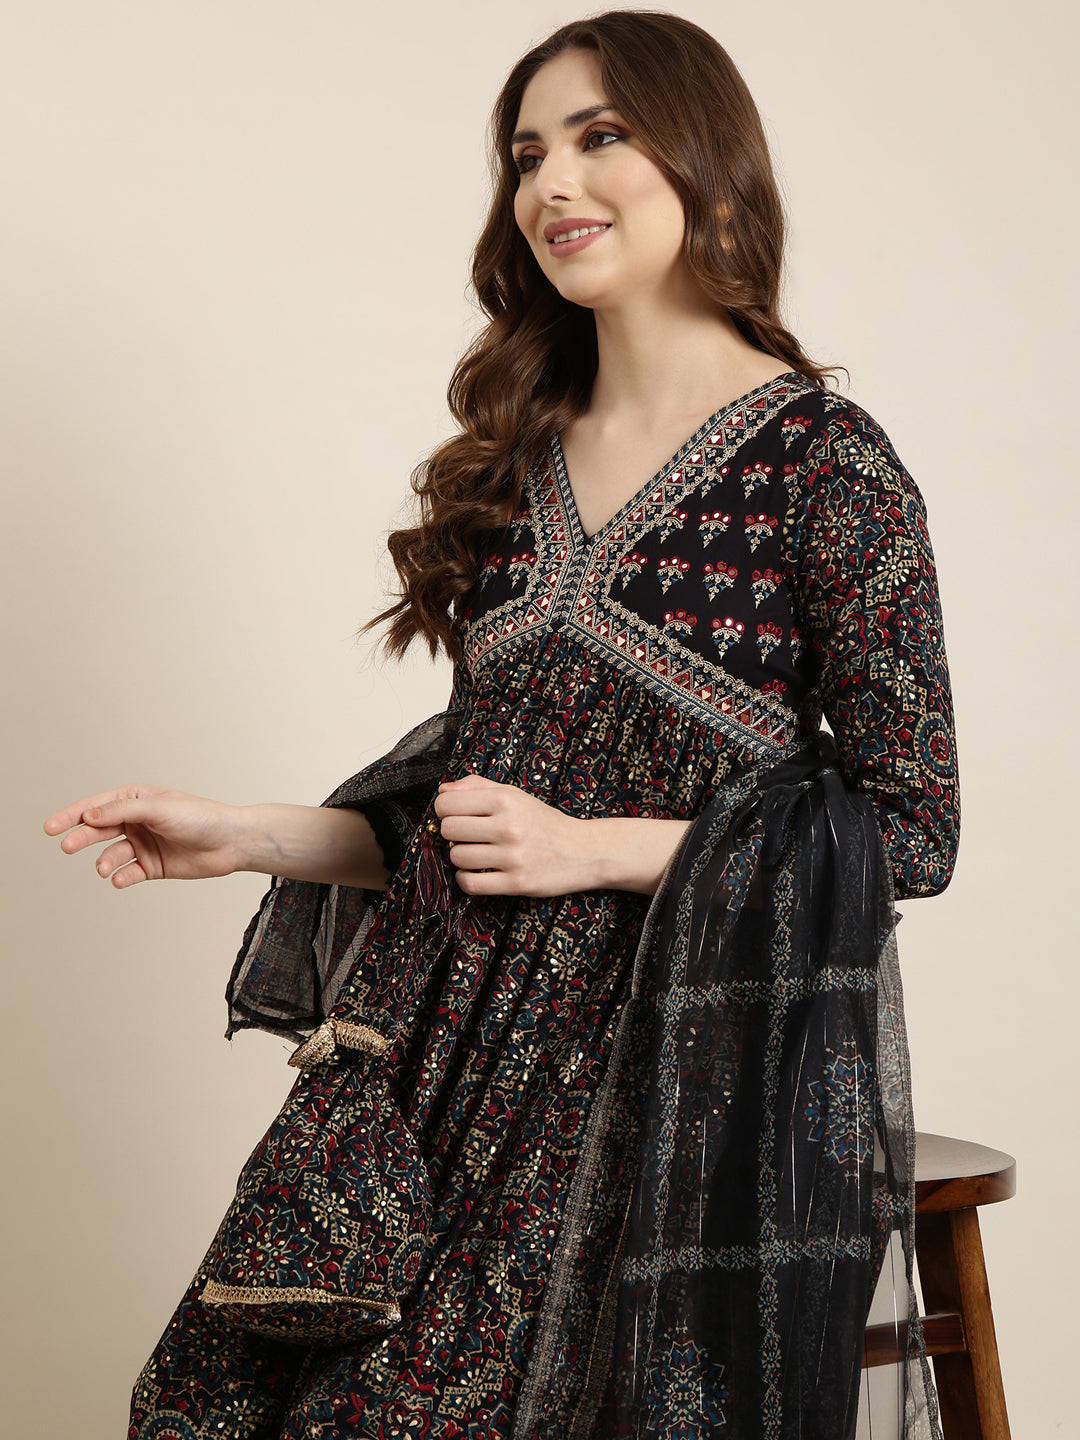 Women A-Line Navy Blue Ethnic Motifs Kurta and Trousers Set Comes With Dupatta